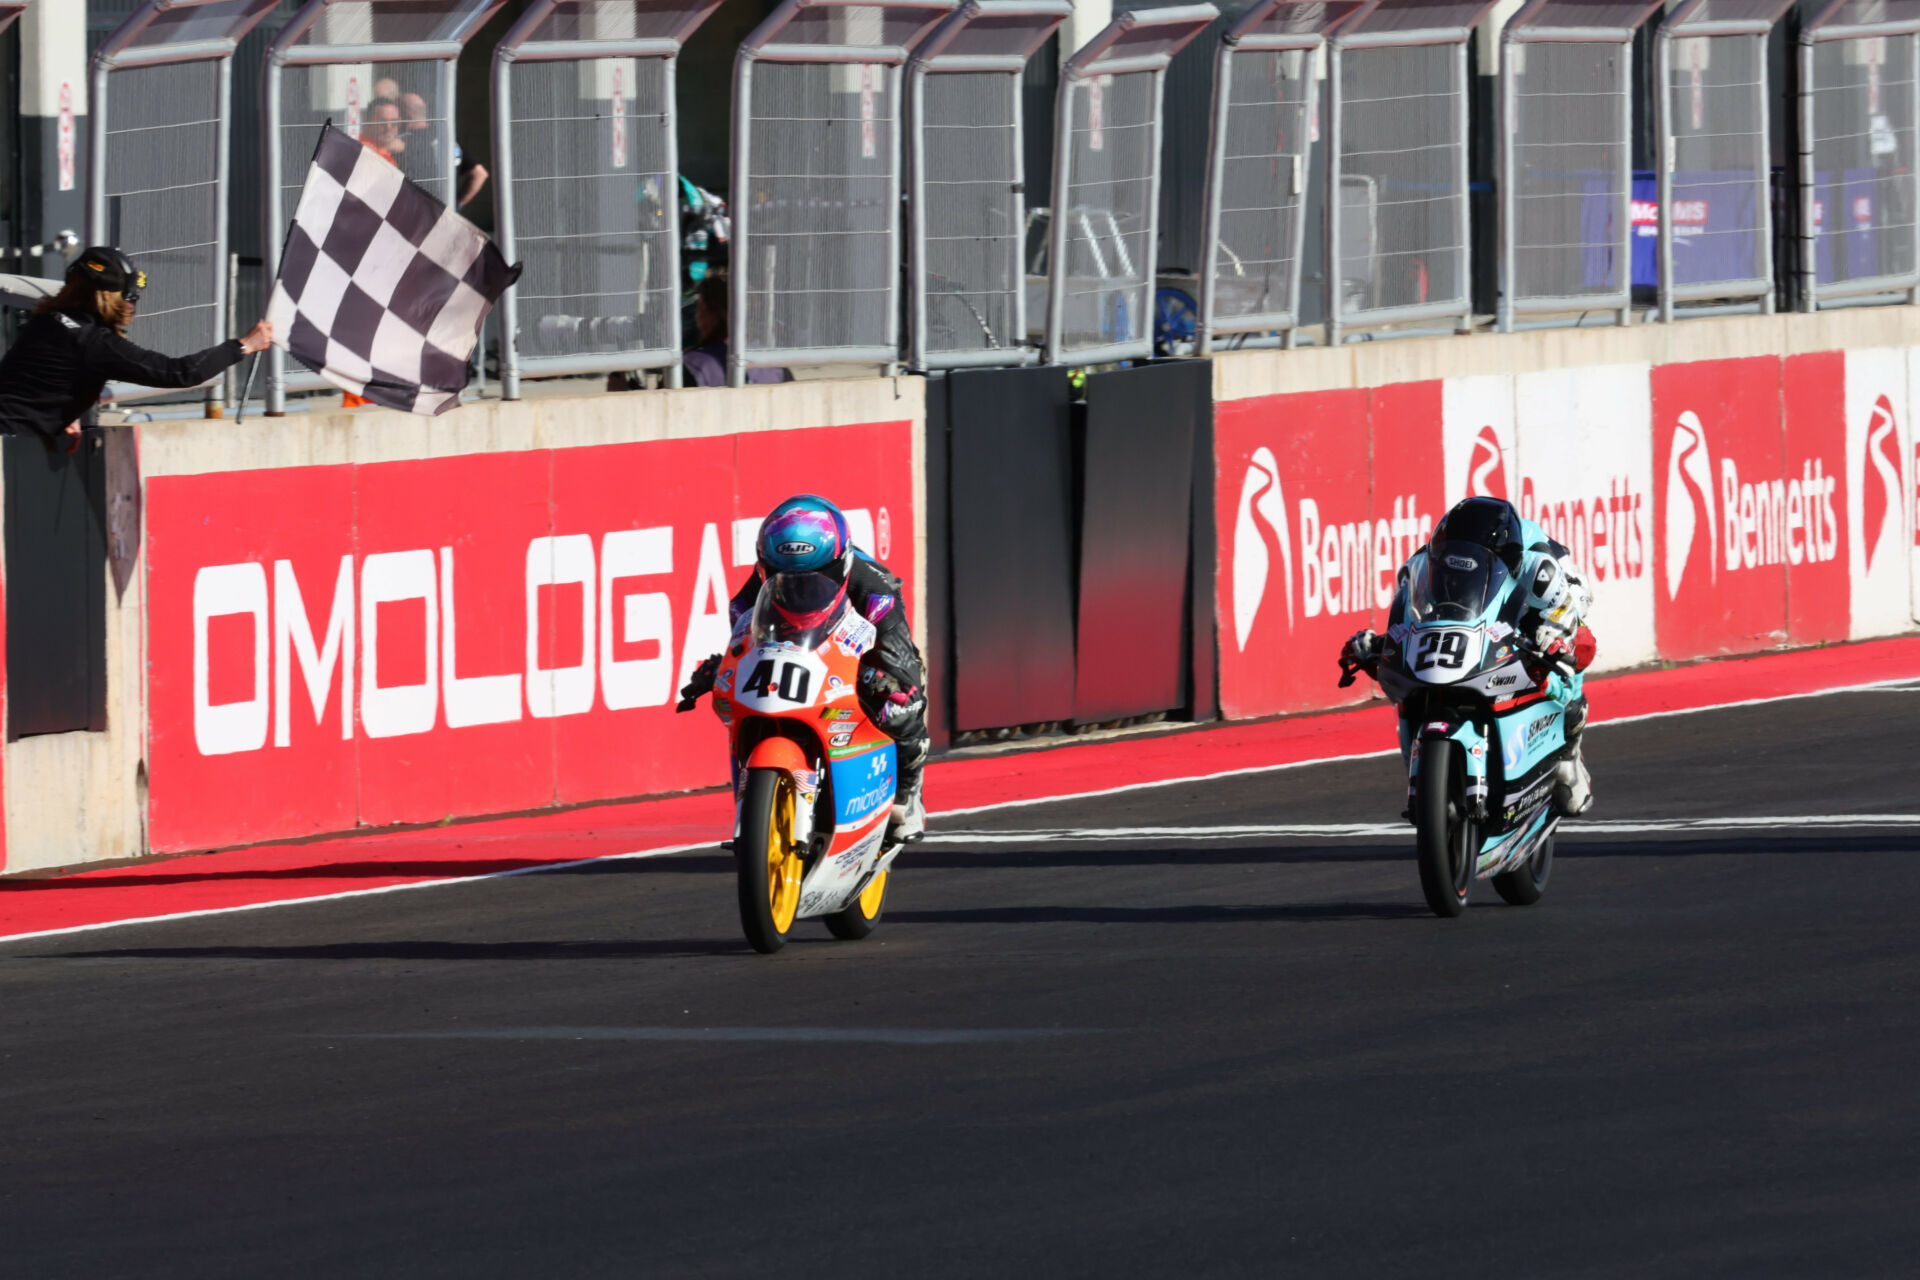 American Julian Correa (40) won British Talent Cup Race One over Lucas Brown (29). Photo courtesy British Talent Cup.